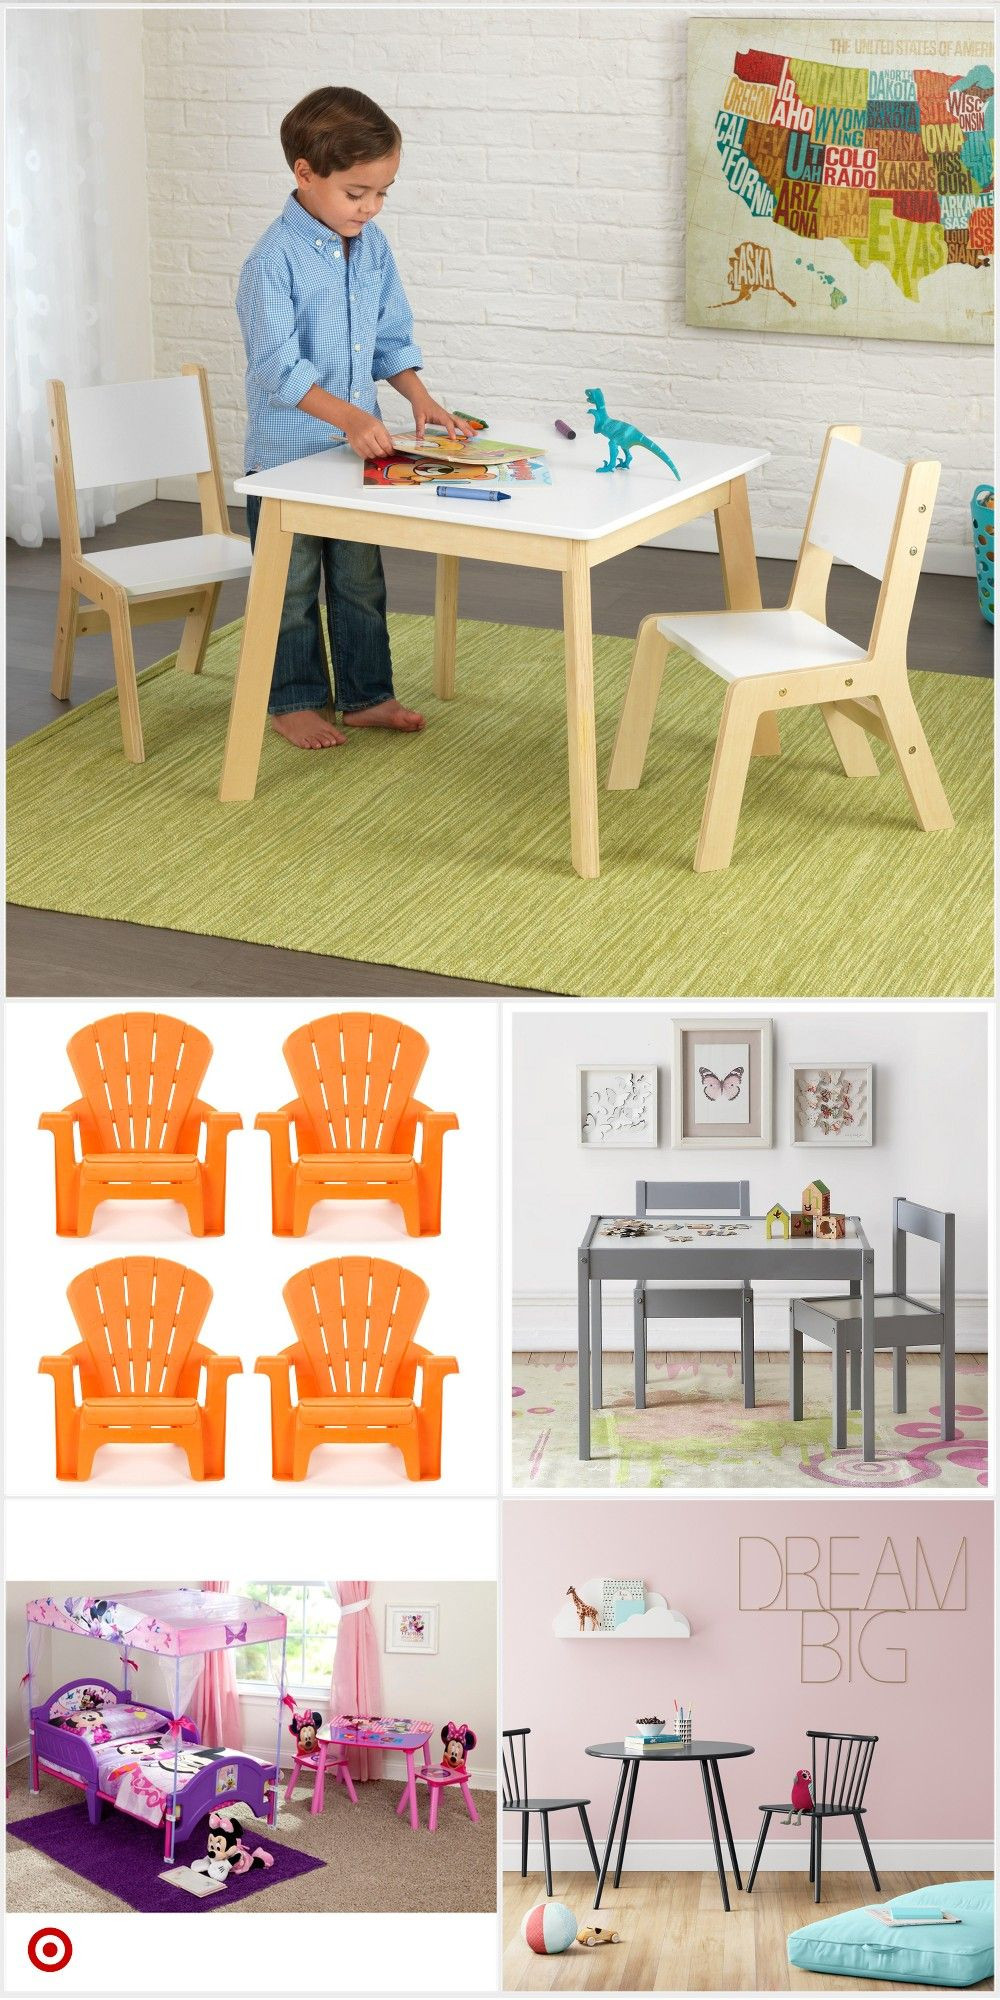 Kids Table And Chairs Target
 Shop Tar for kids chair set you will love at great low